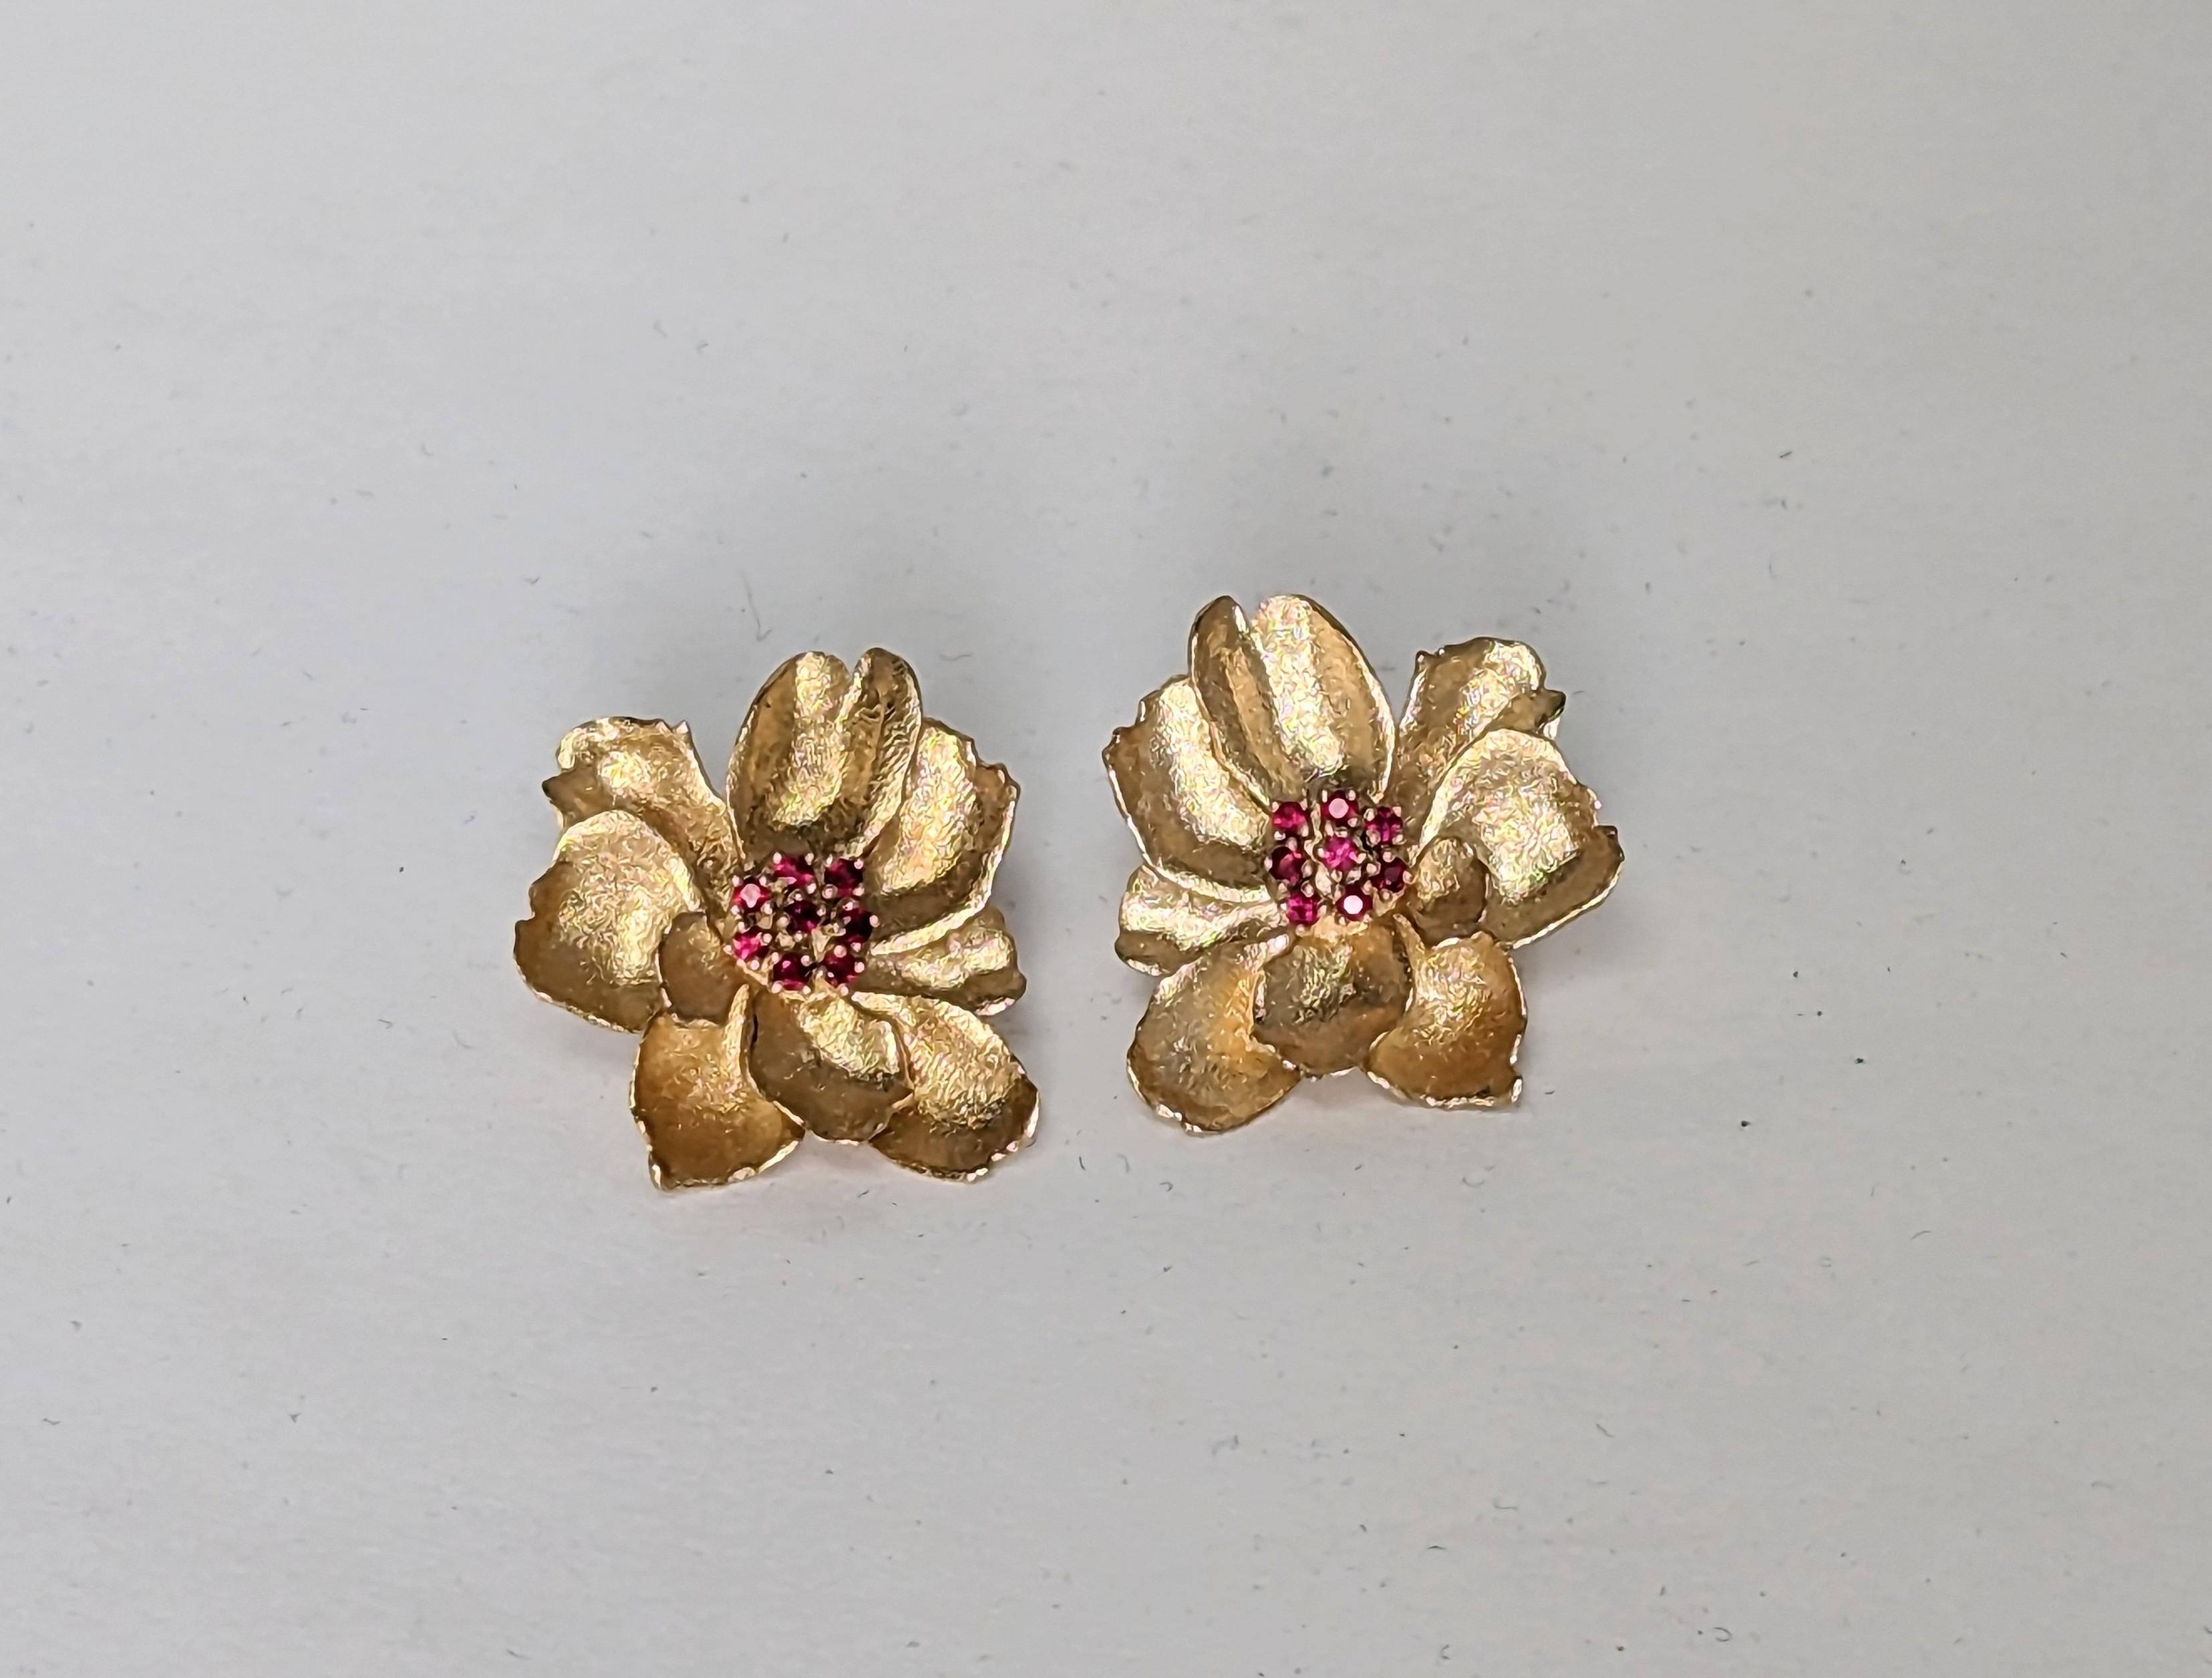 14 Karat White Gold Wild Flower Earrings with Rubies, Tiffany Designer Thomas Kurilla sculpted these exclusively for 1stdibs. Boredom causes us to challenge ourselves. Working from life especially during the covid  virus could push us two ways . To